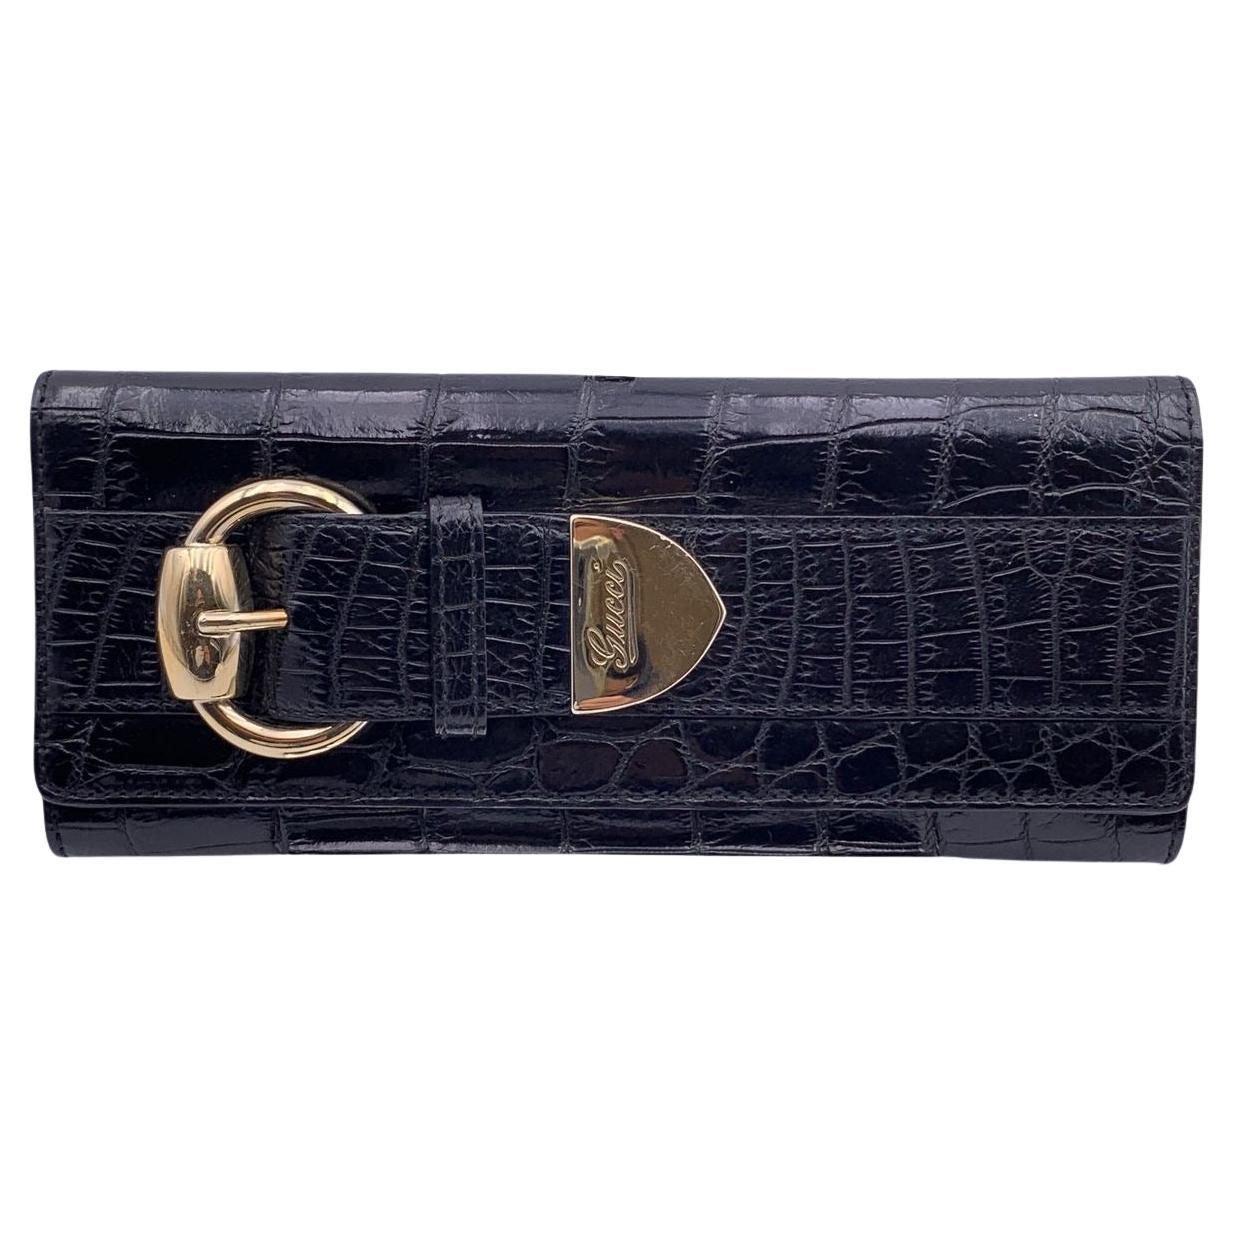 Gucci Black Embossed Leather Romy Clutch Bag Wallet